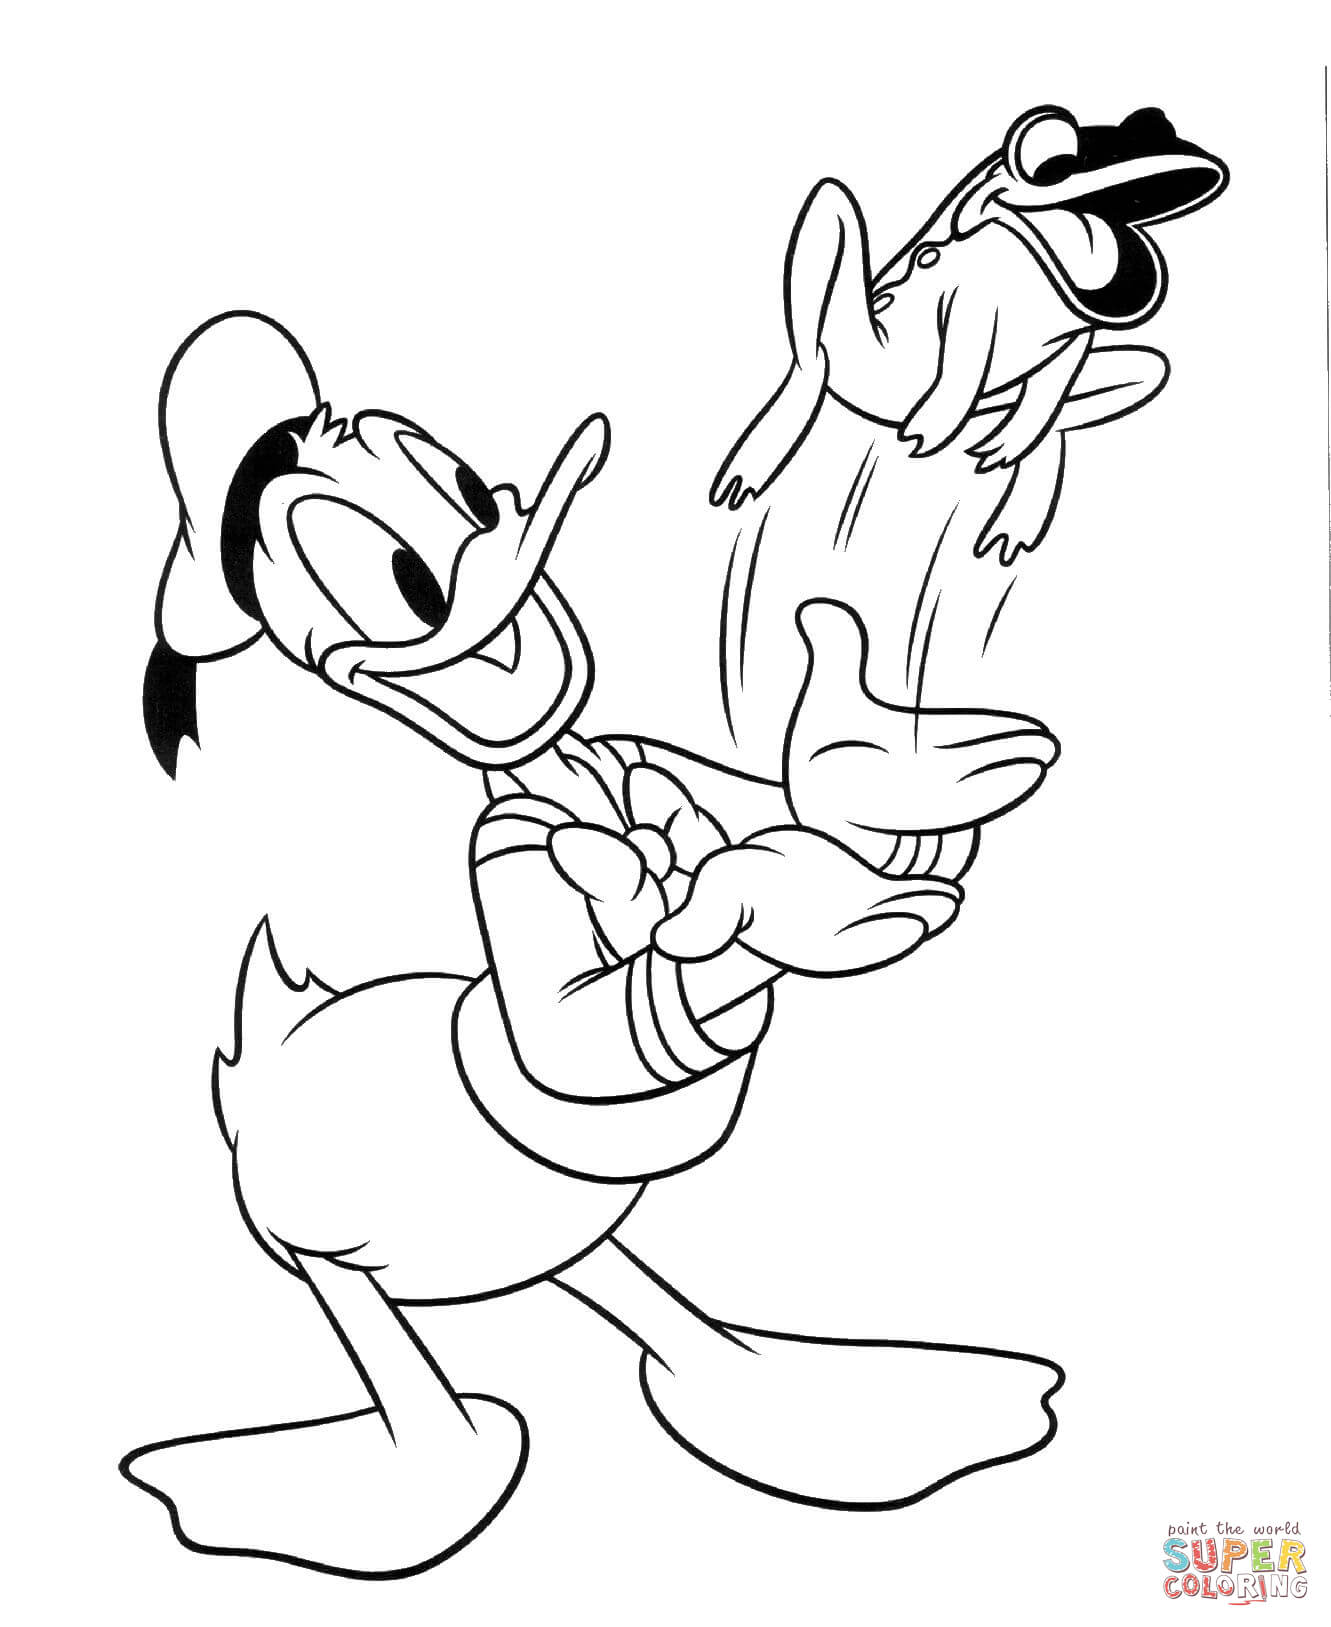 Donald Duck coloring pages | Free Coloring Pages